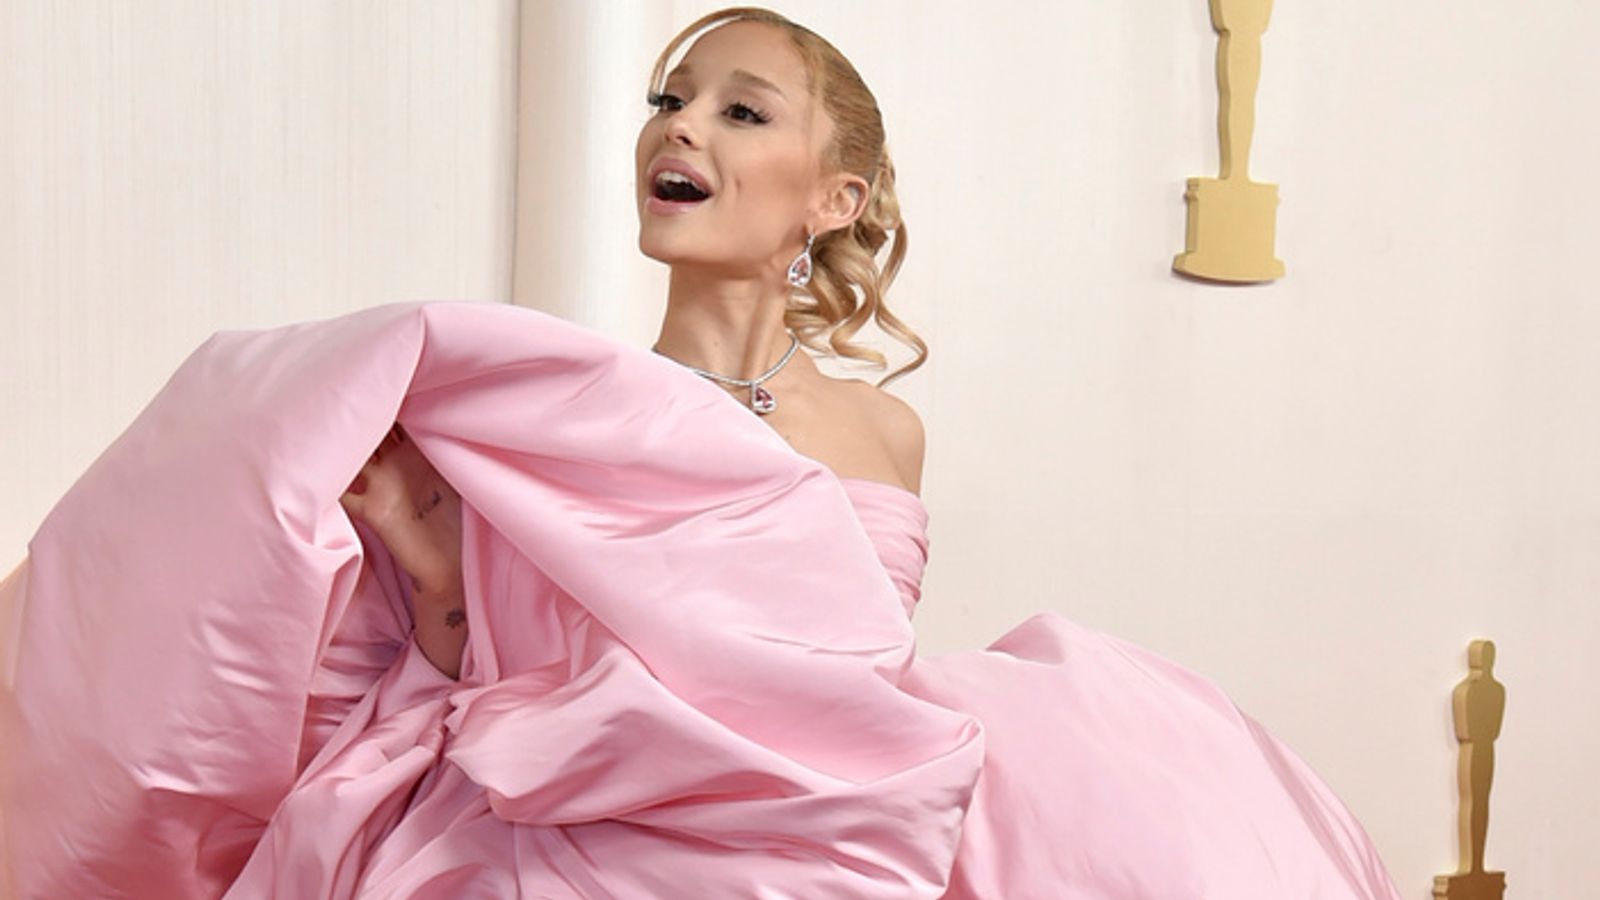 Stars Shine on the Oscars Red Carpet Ahead of the 96th Academy Awards Ceremony